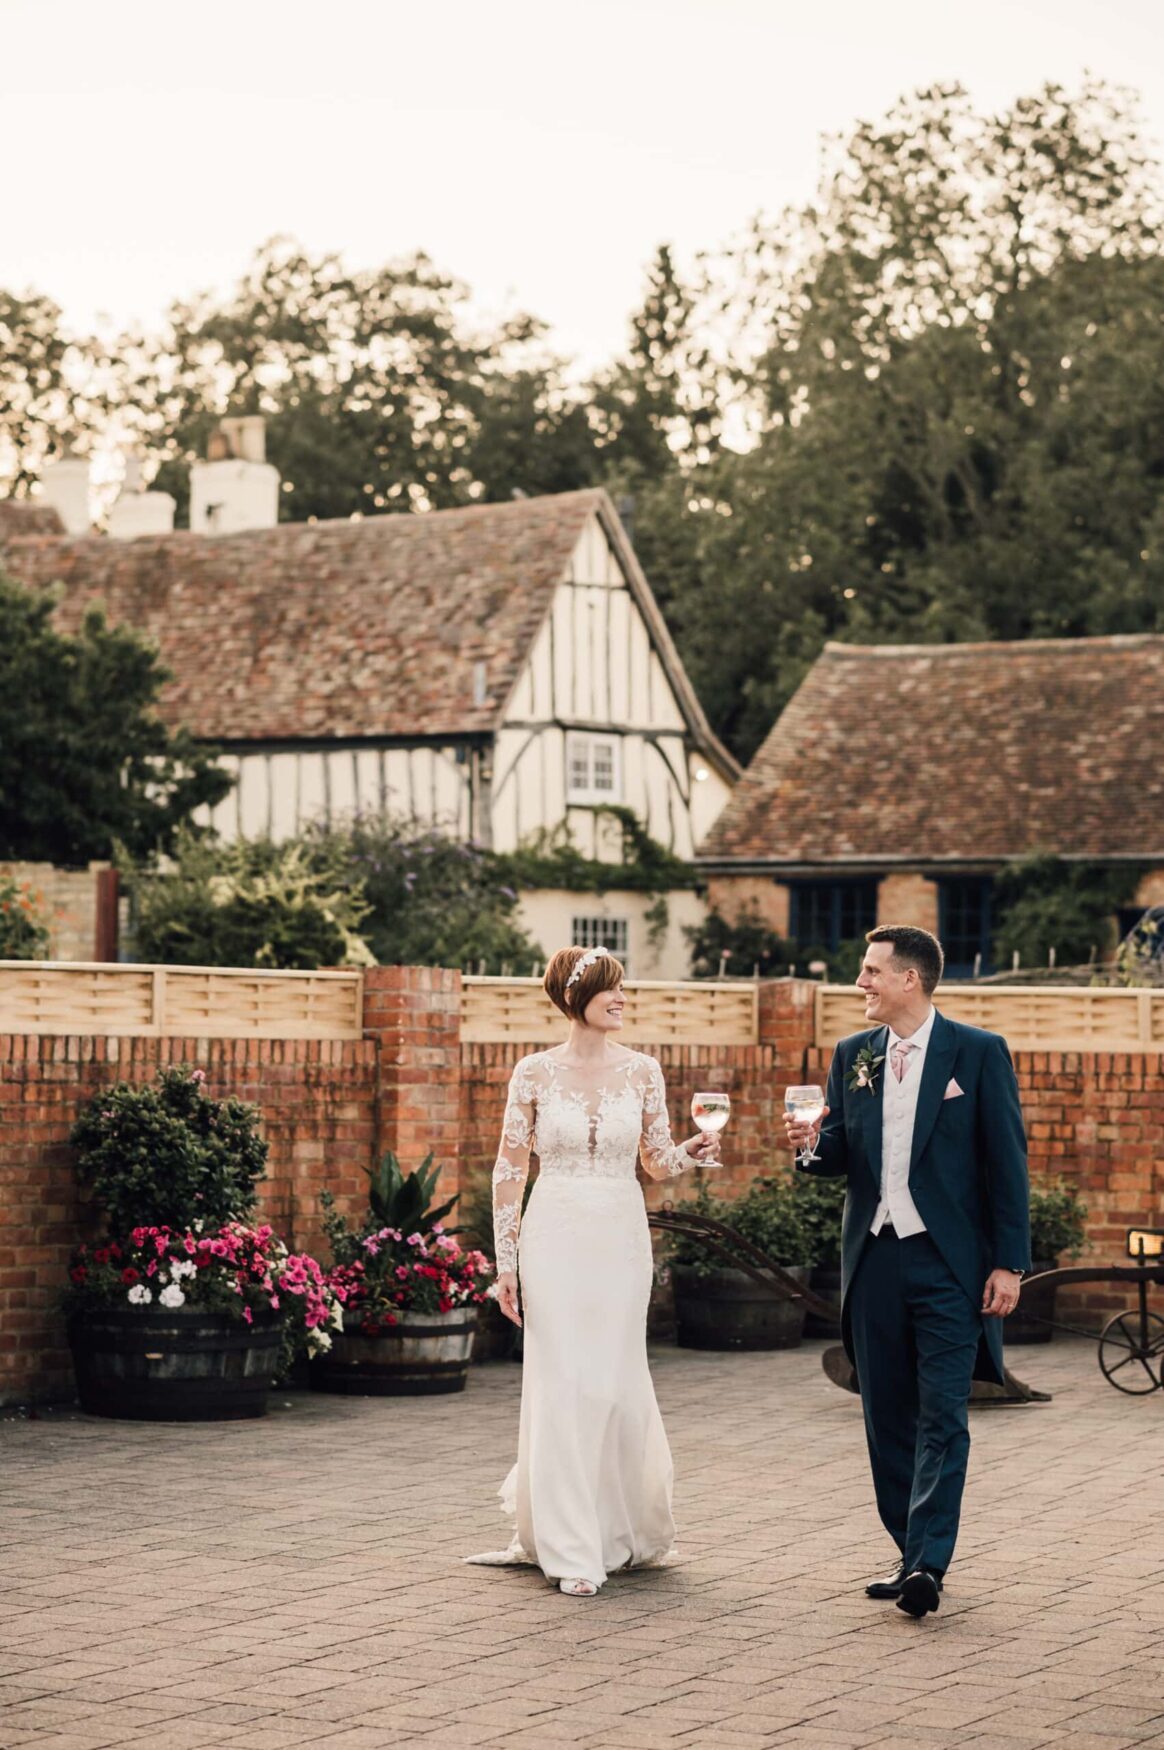 Newlyweds in the courtyard at Bassmead Manor Barns,